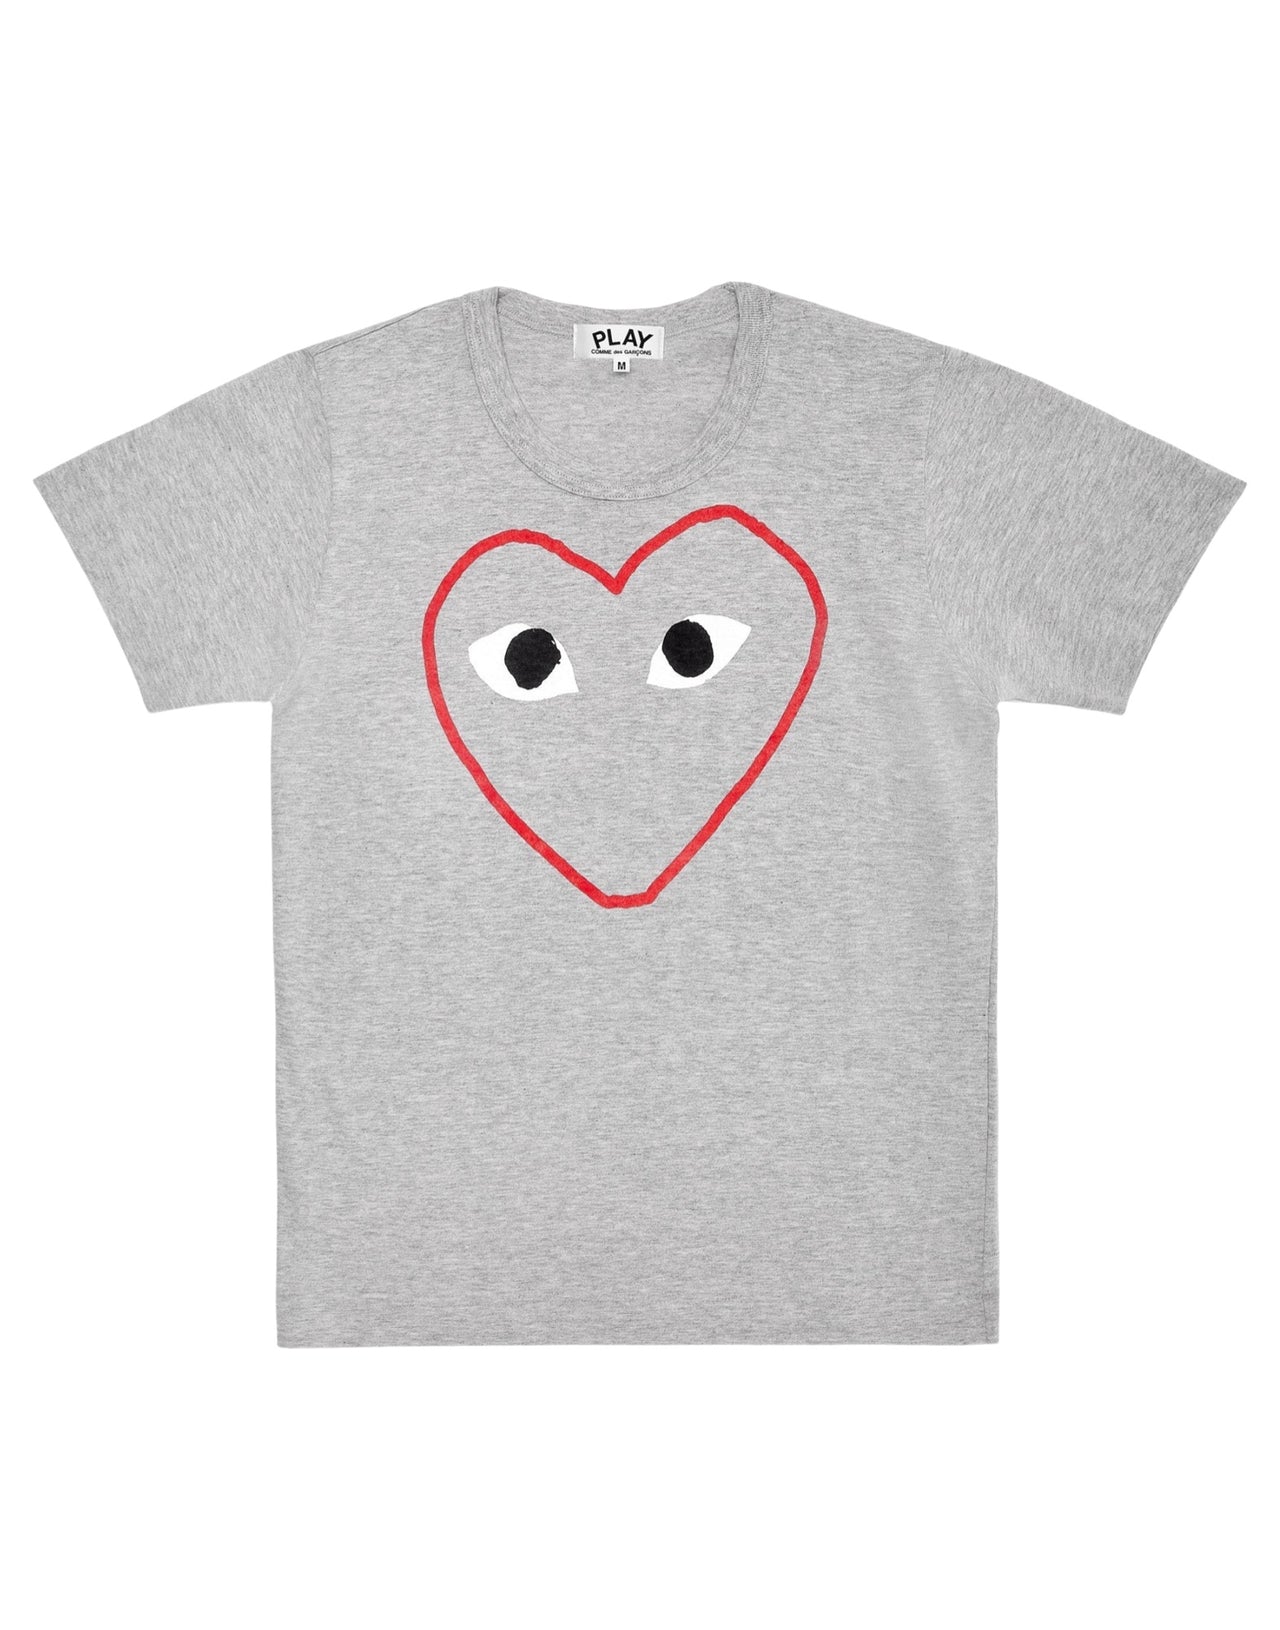 Cdg play t-shirt with gray empty heart